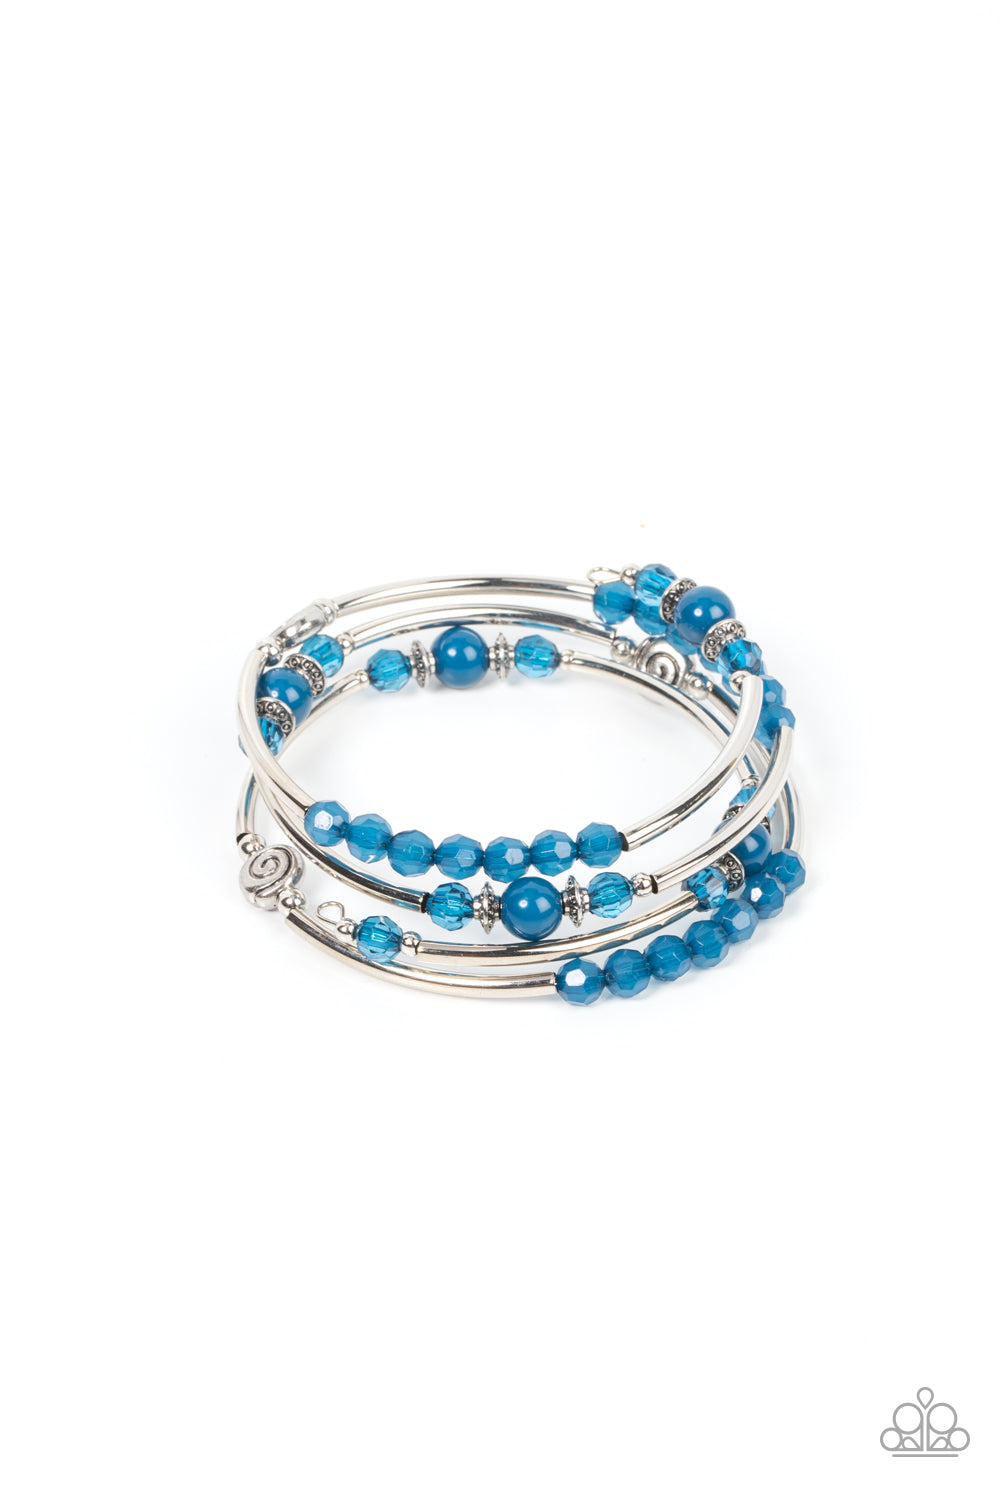 Whimsically Whirly - Paparazzi - Blue and Silver Bead Coil Bracelet